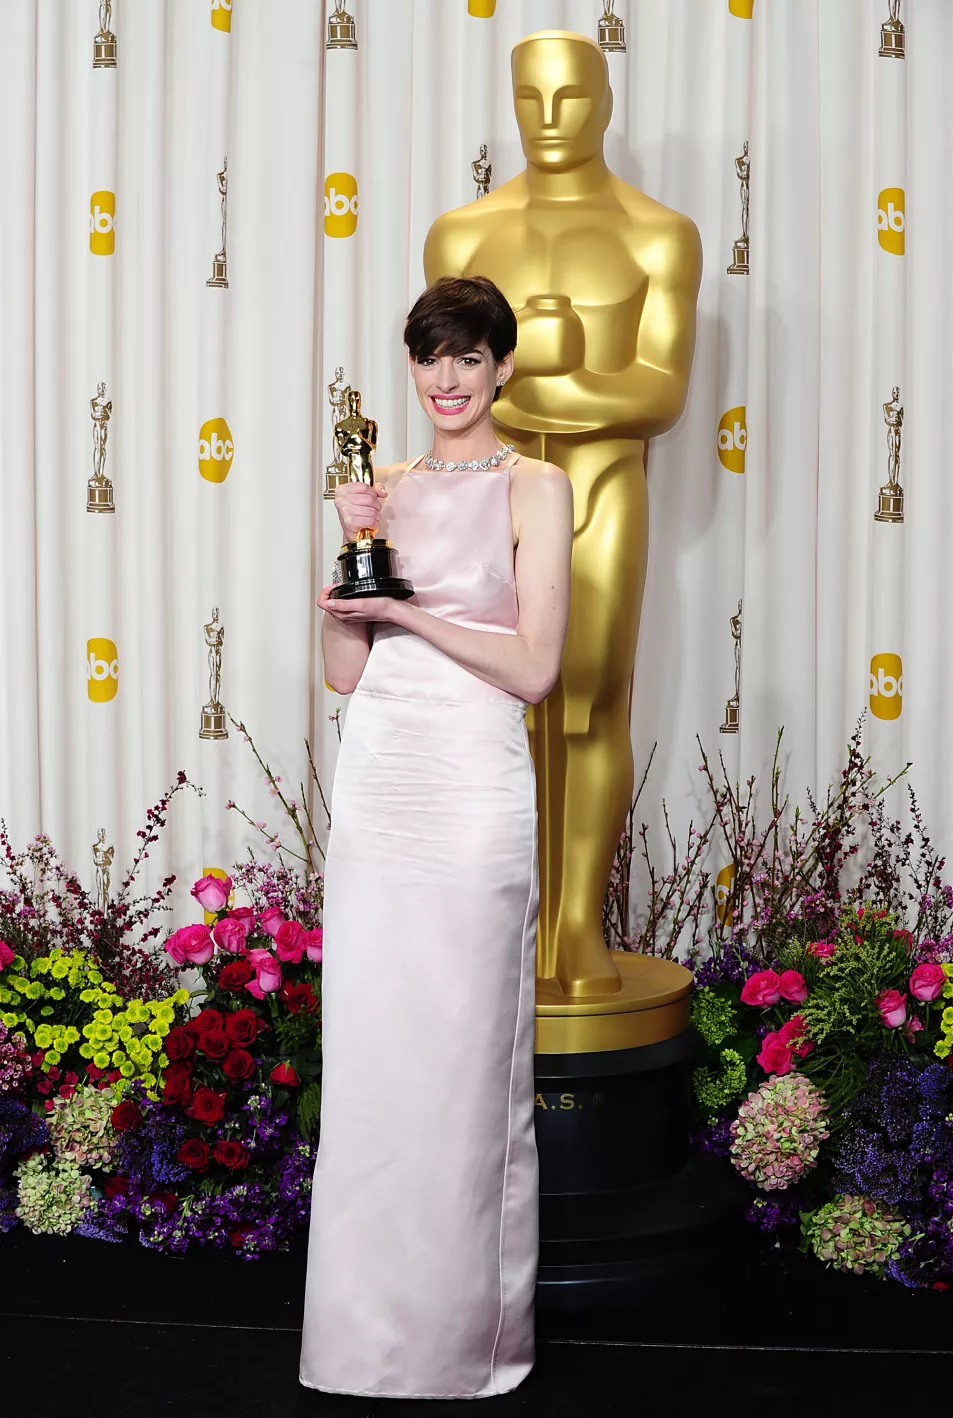 Anne Hathaway with her Oscar for best supporting actress received for her role in Les Miserables during the 85th Academy Awards